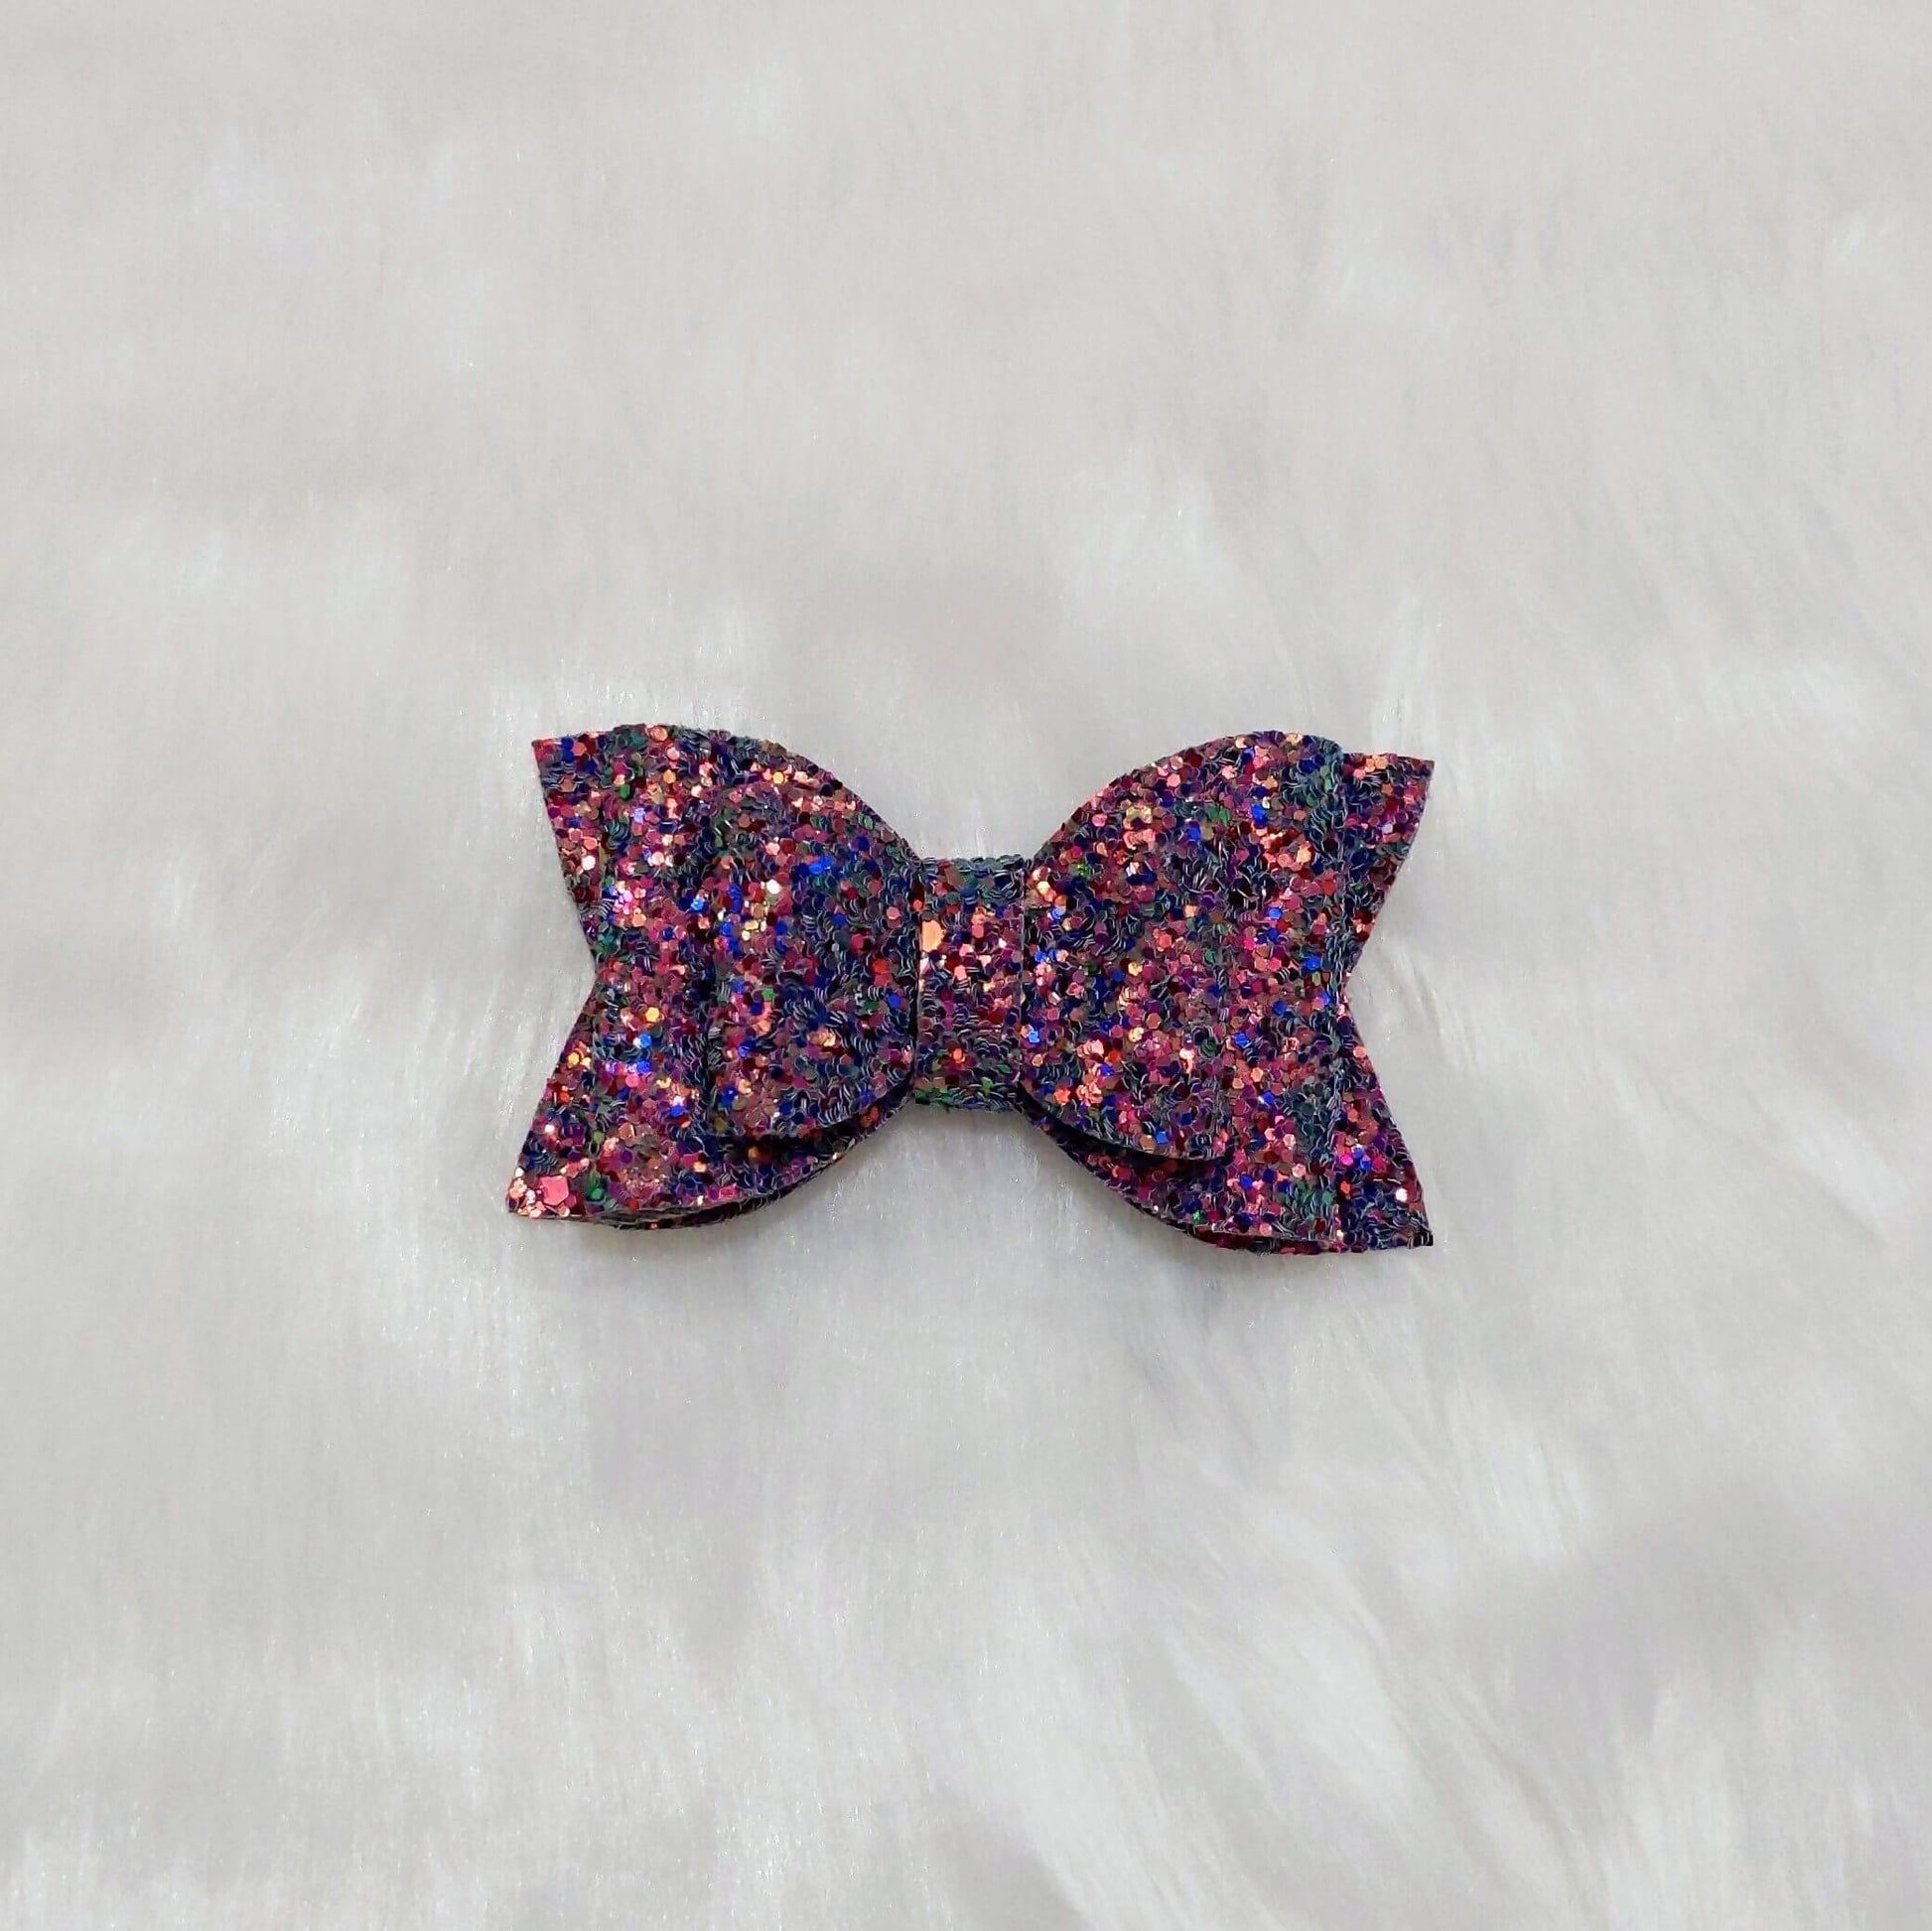 Glitter Party Bow Hair Clip | Designer Hair Accessories for Kids and Girls